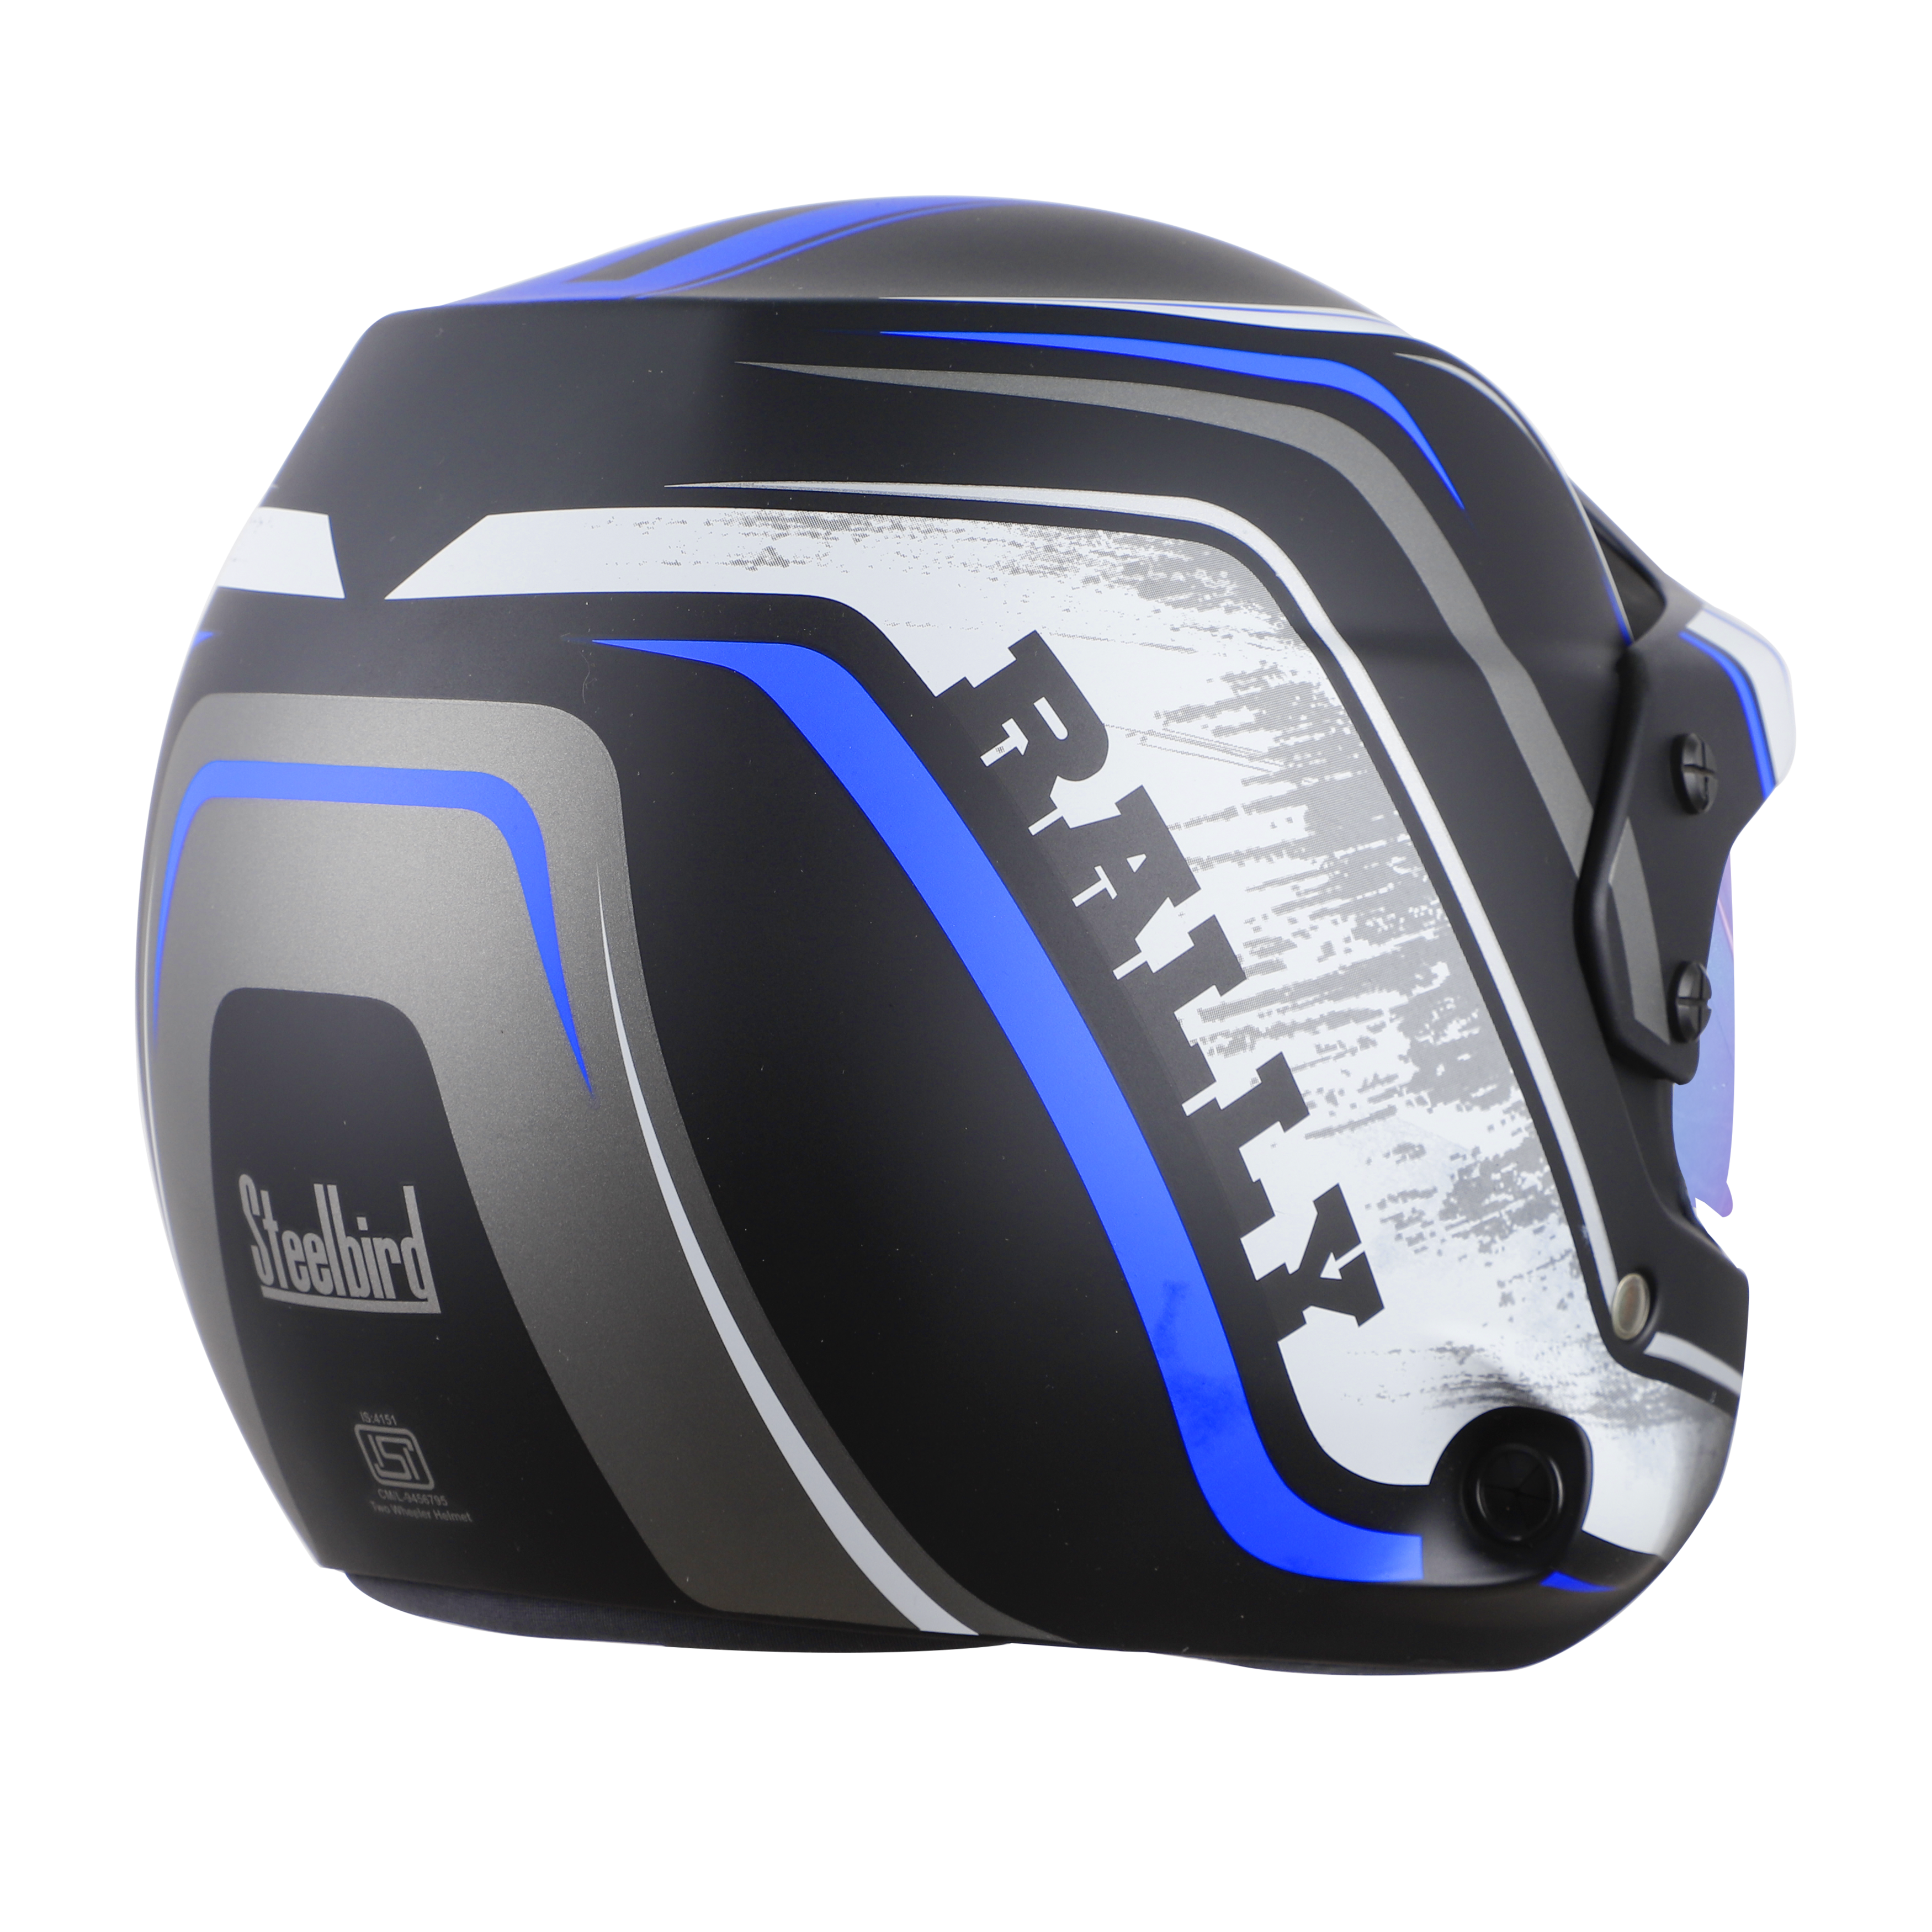 SB-51 RALLY RUT GLOSSY BLACK WITH BLUE ( FITTED WITH CLEAR VISOR EXTRA CHROME RAINBOW VISOR FREE)